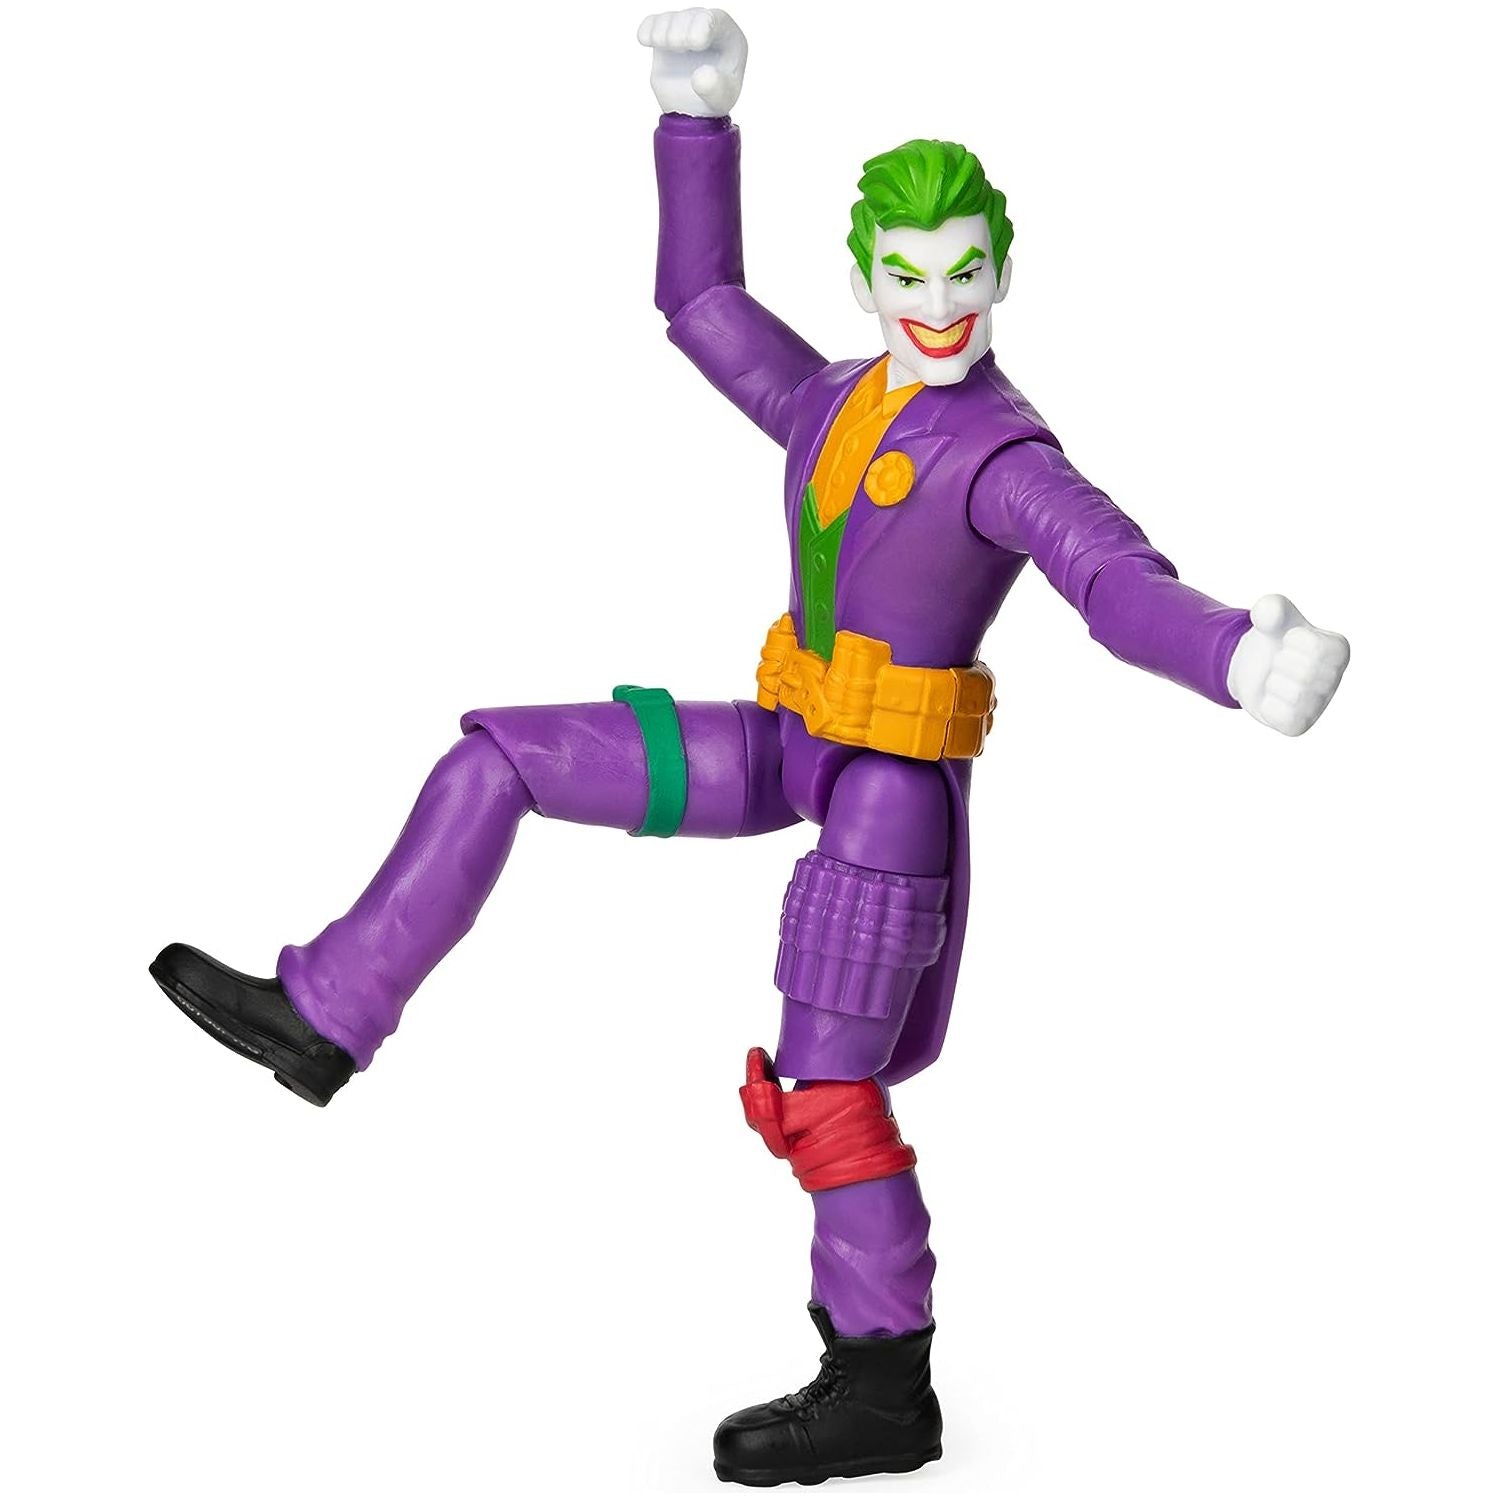 DC Comics Batman 4-inch The Joker Action Figures for Boys with 6 Mystery Accessories